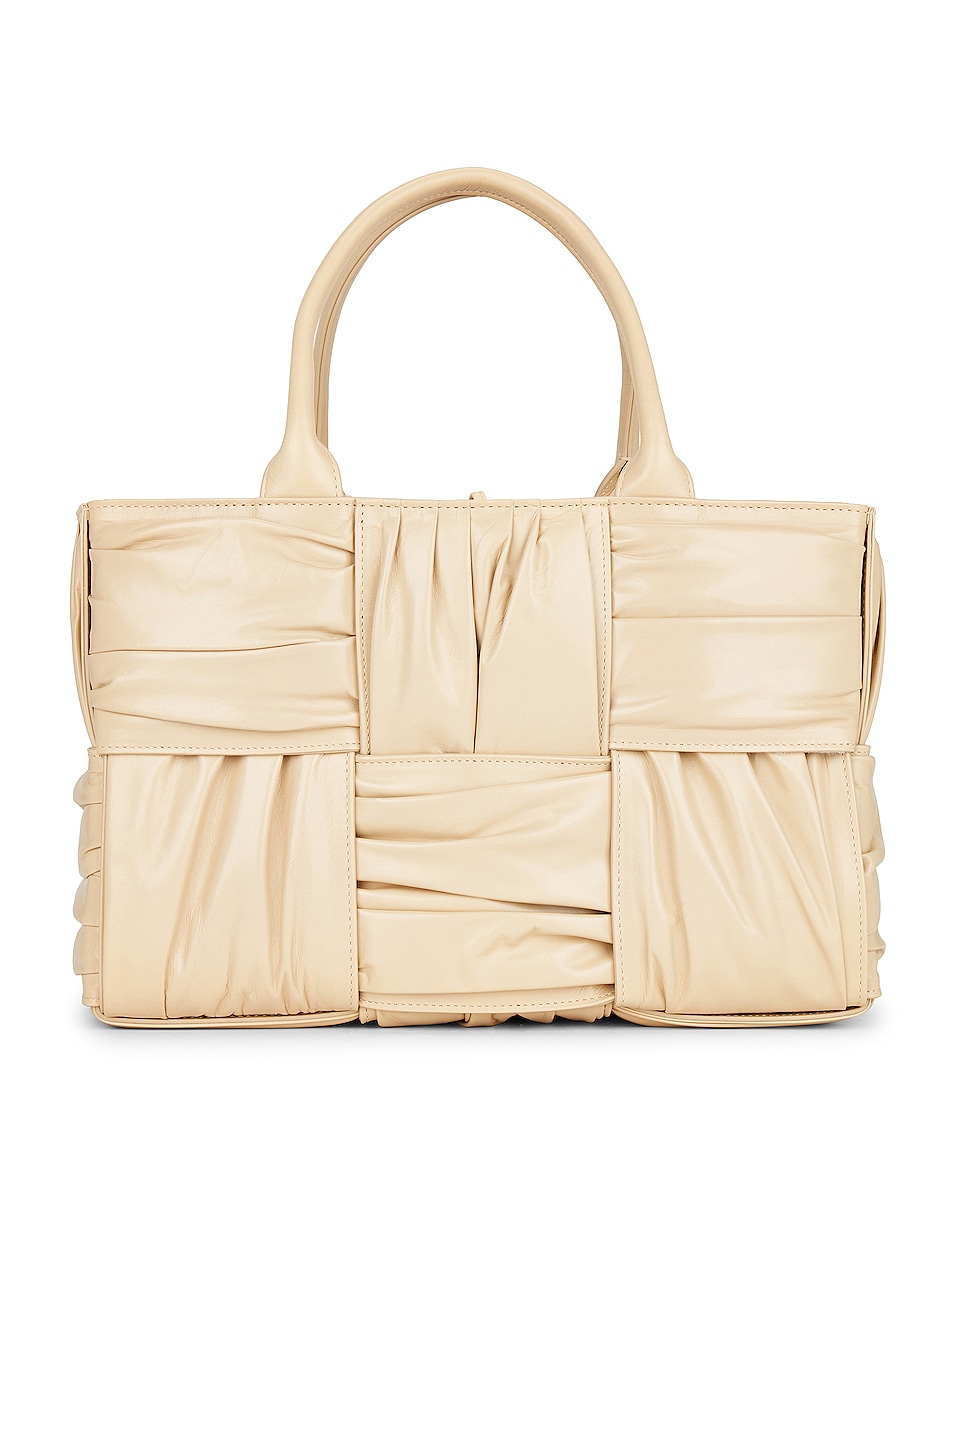 Small Arco Tote Bag in Beige